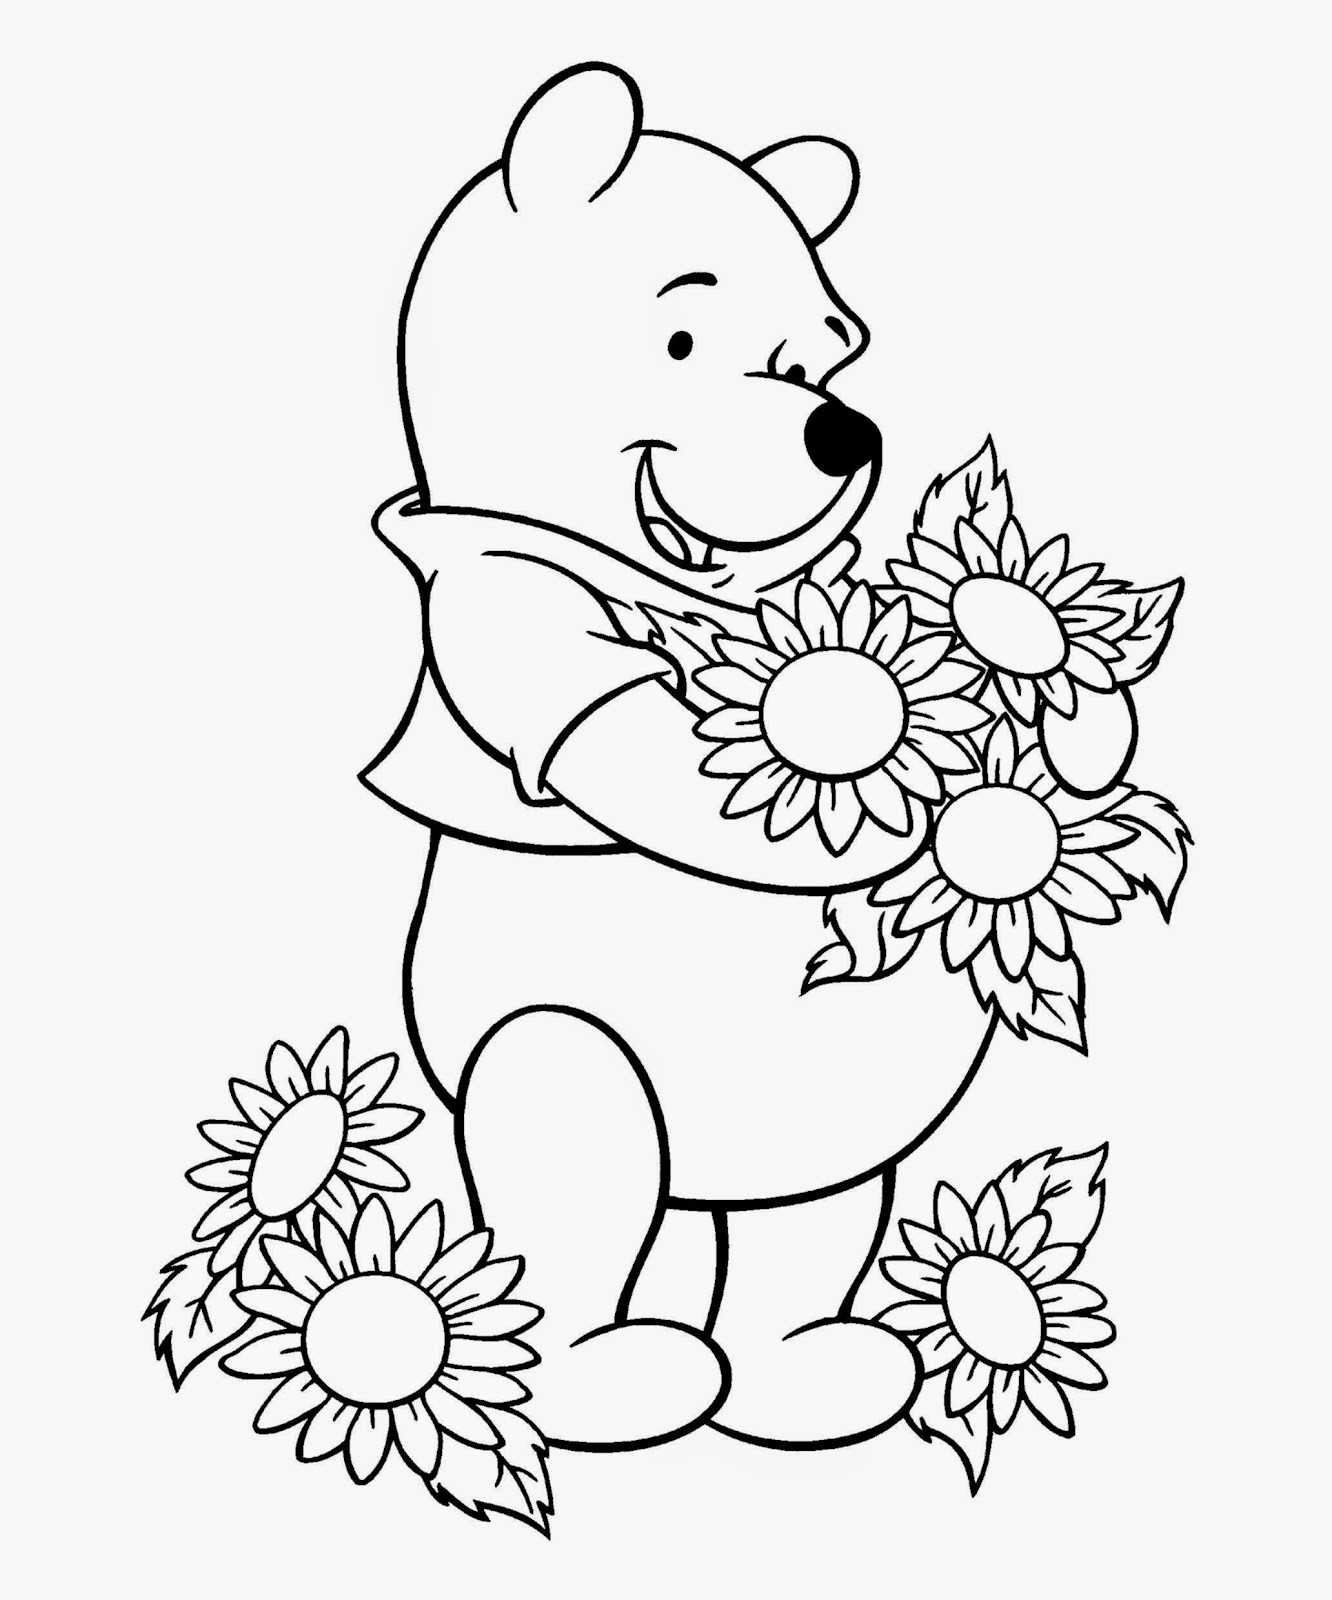 Winnie The Pooh Printable Coloring Pages
 Winnie The Pooh Coloring Sheets